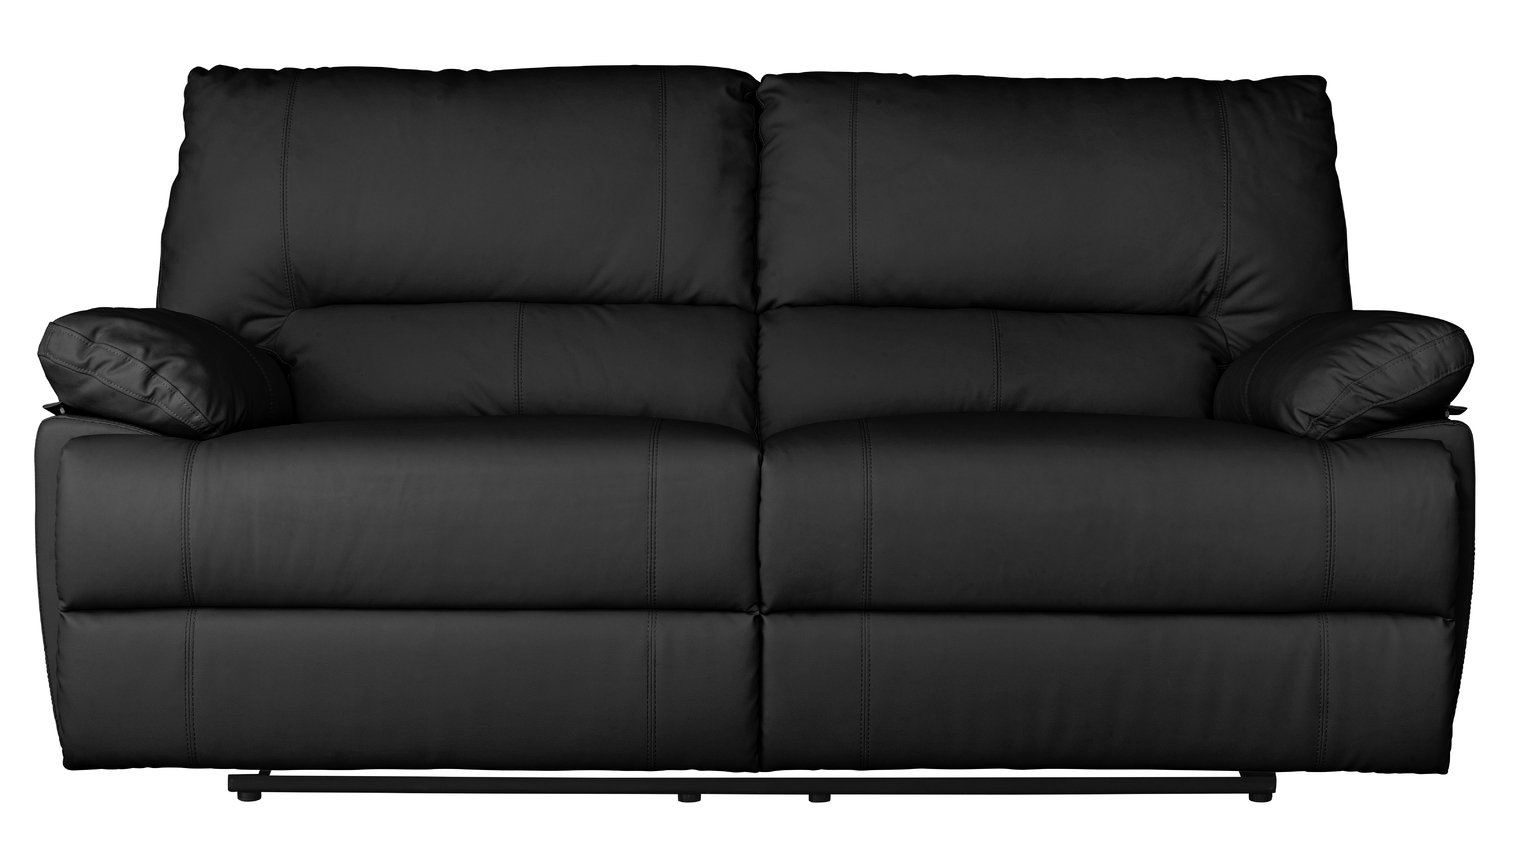 Argos Home Devlin 3 Seater Leather Mix Recliner Sofa -Black review